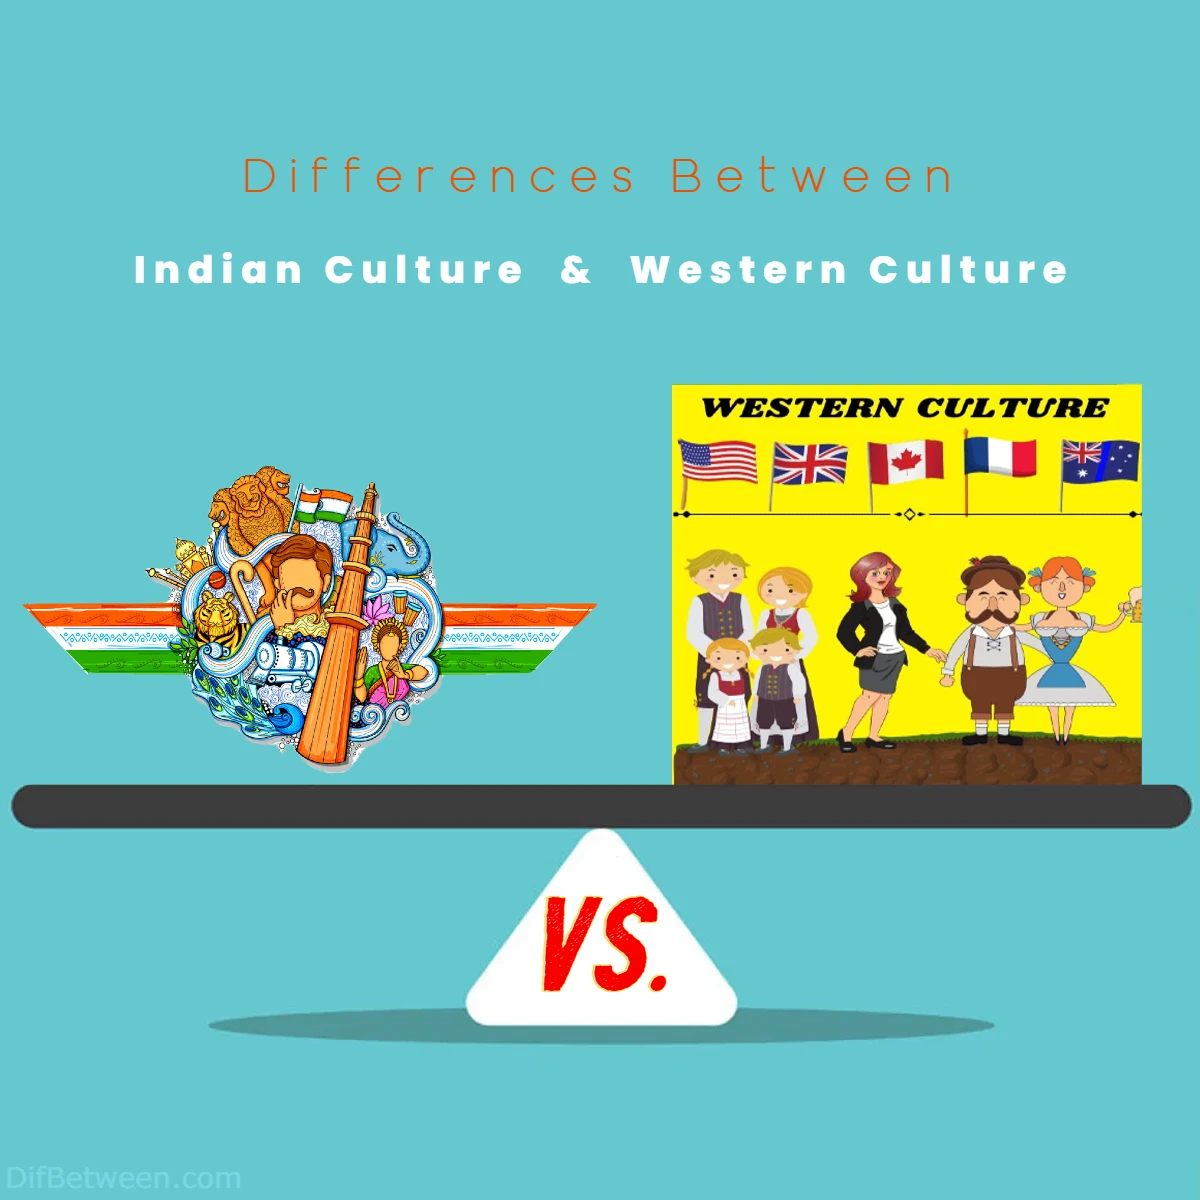 Differences Between Indian Culture vs Western Culture